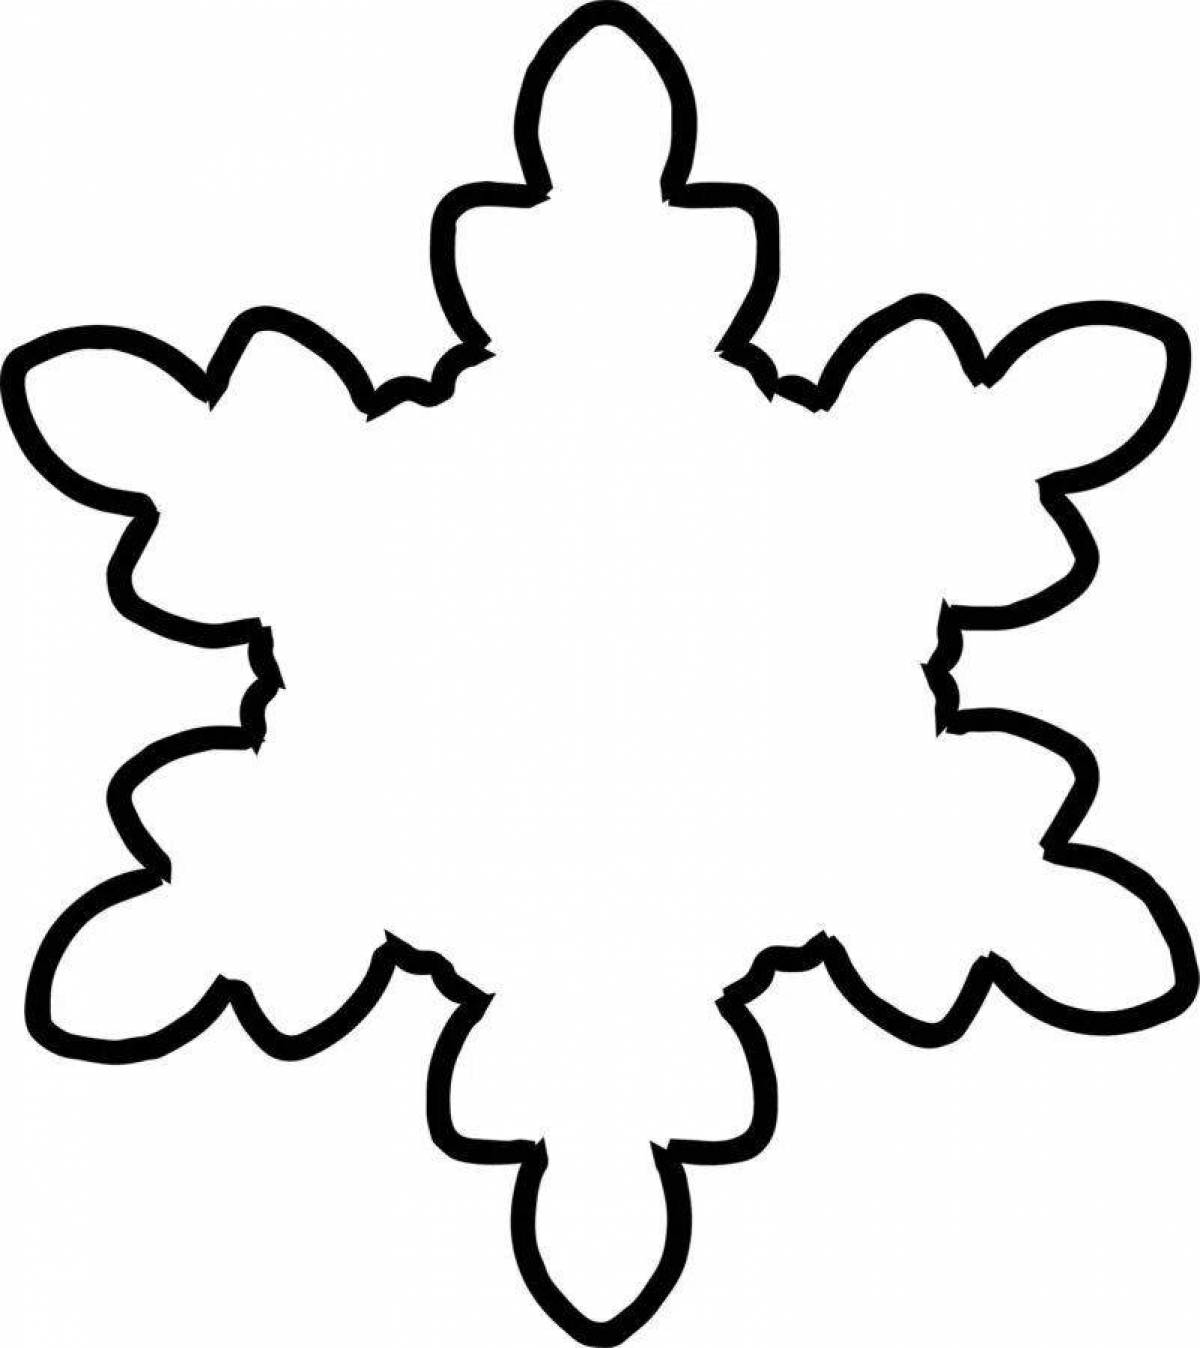 Playful snowflake coloring page for kids